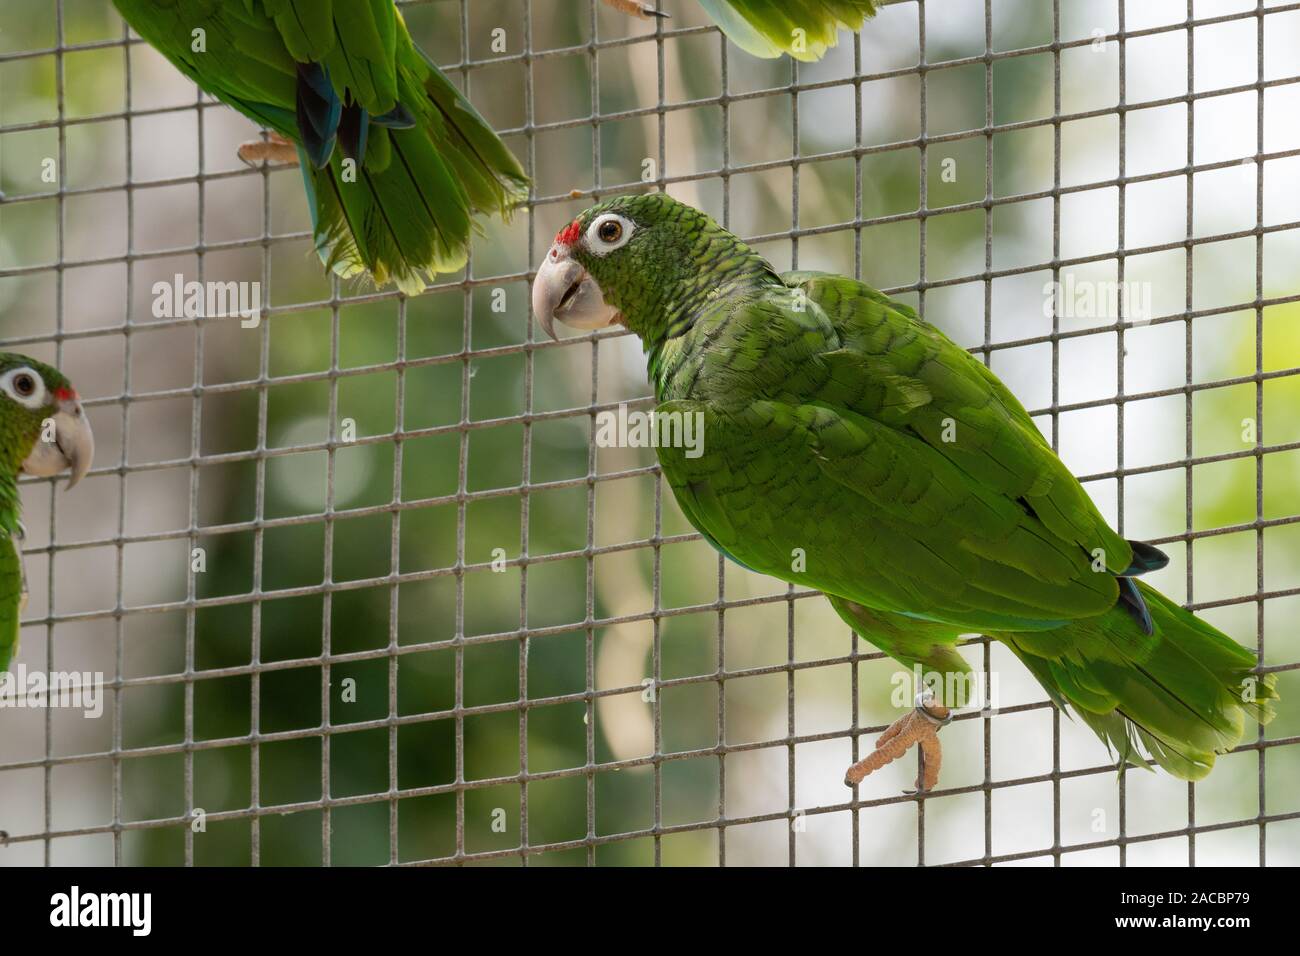 Puerto Rican Parrot (Amazona vittata), a Critically Endangered bird species, at conservation breeding facility, El Yunque National Forest, Puerto Rico Stock Photo